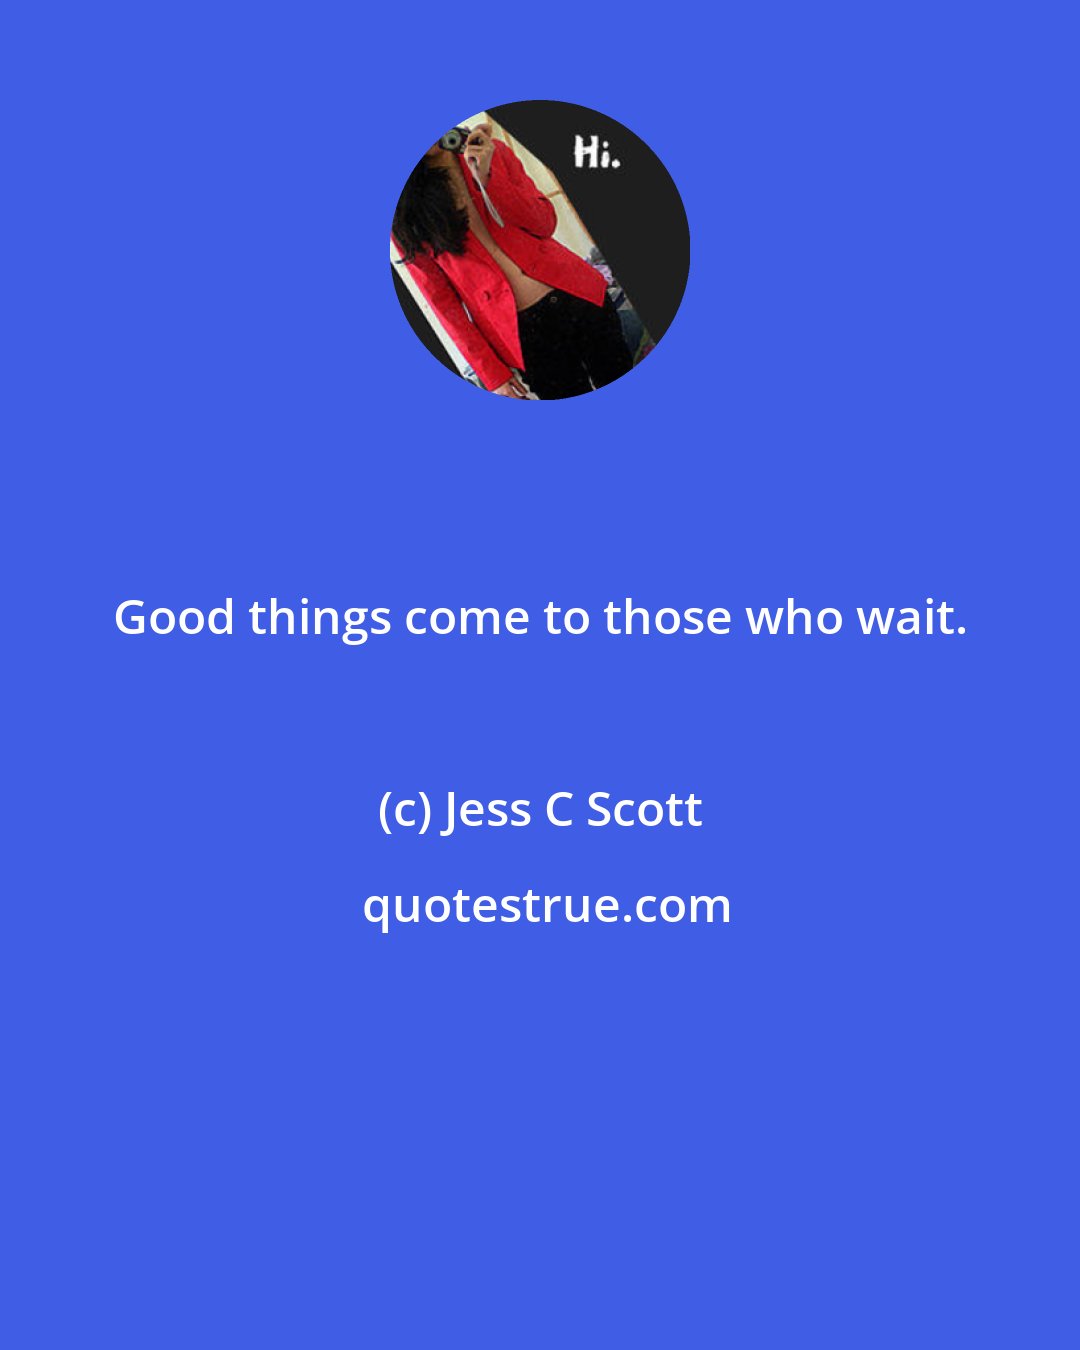 Jess C Scott: Good things come to those who wait.